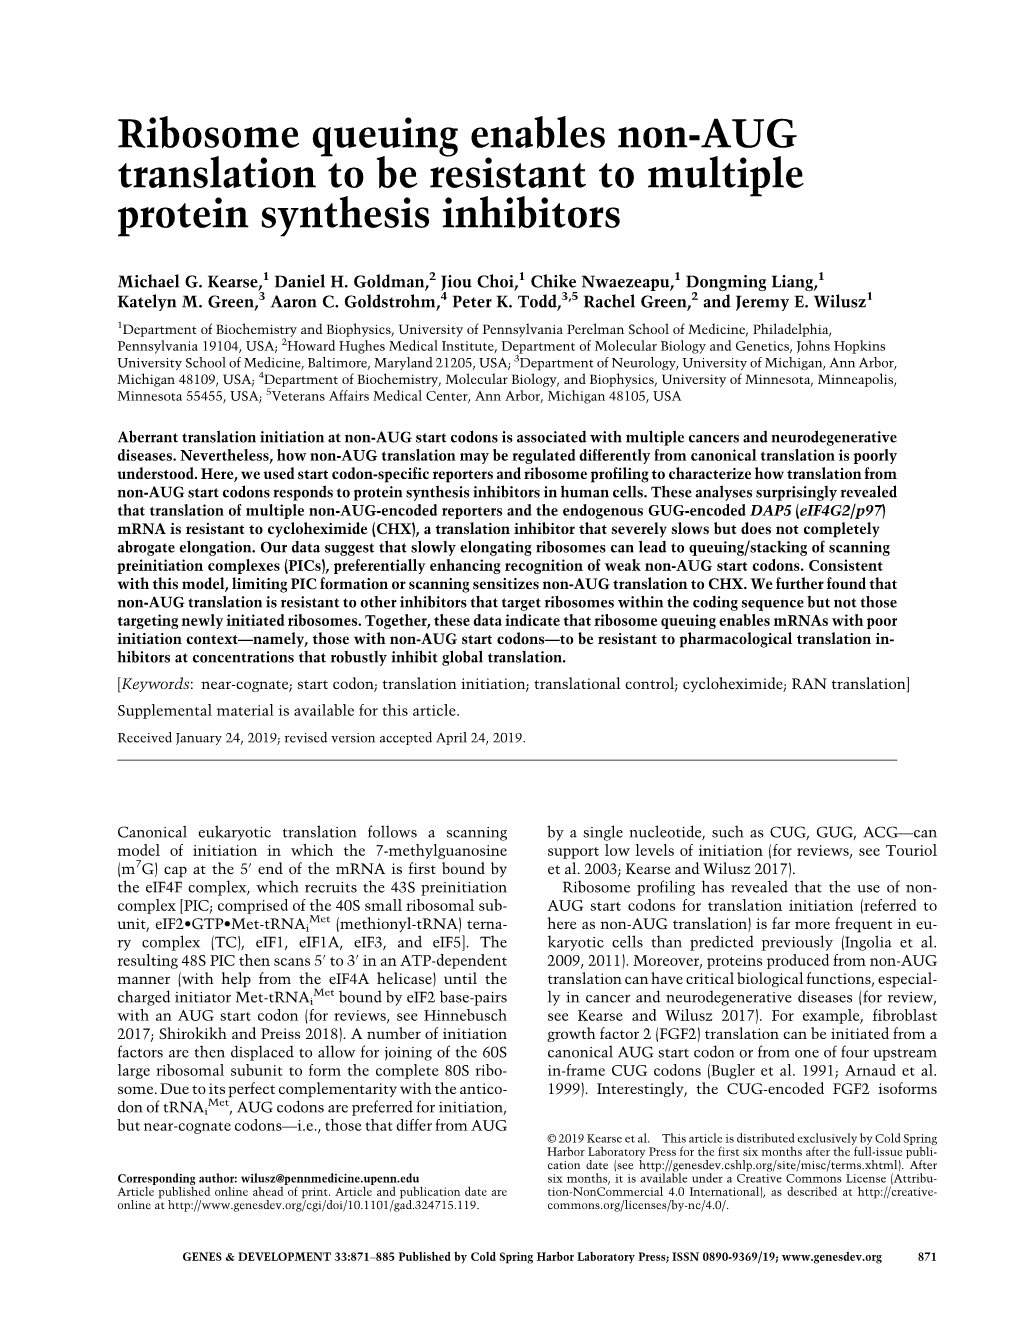 Ribosome Queuing Enables Non-AUG Translation to Be Resistant to Multiple Protein Synthesis Inhibitors